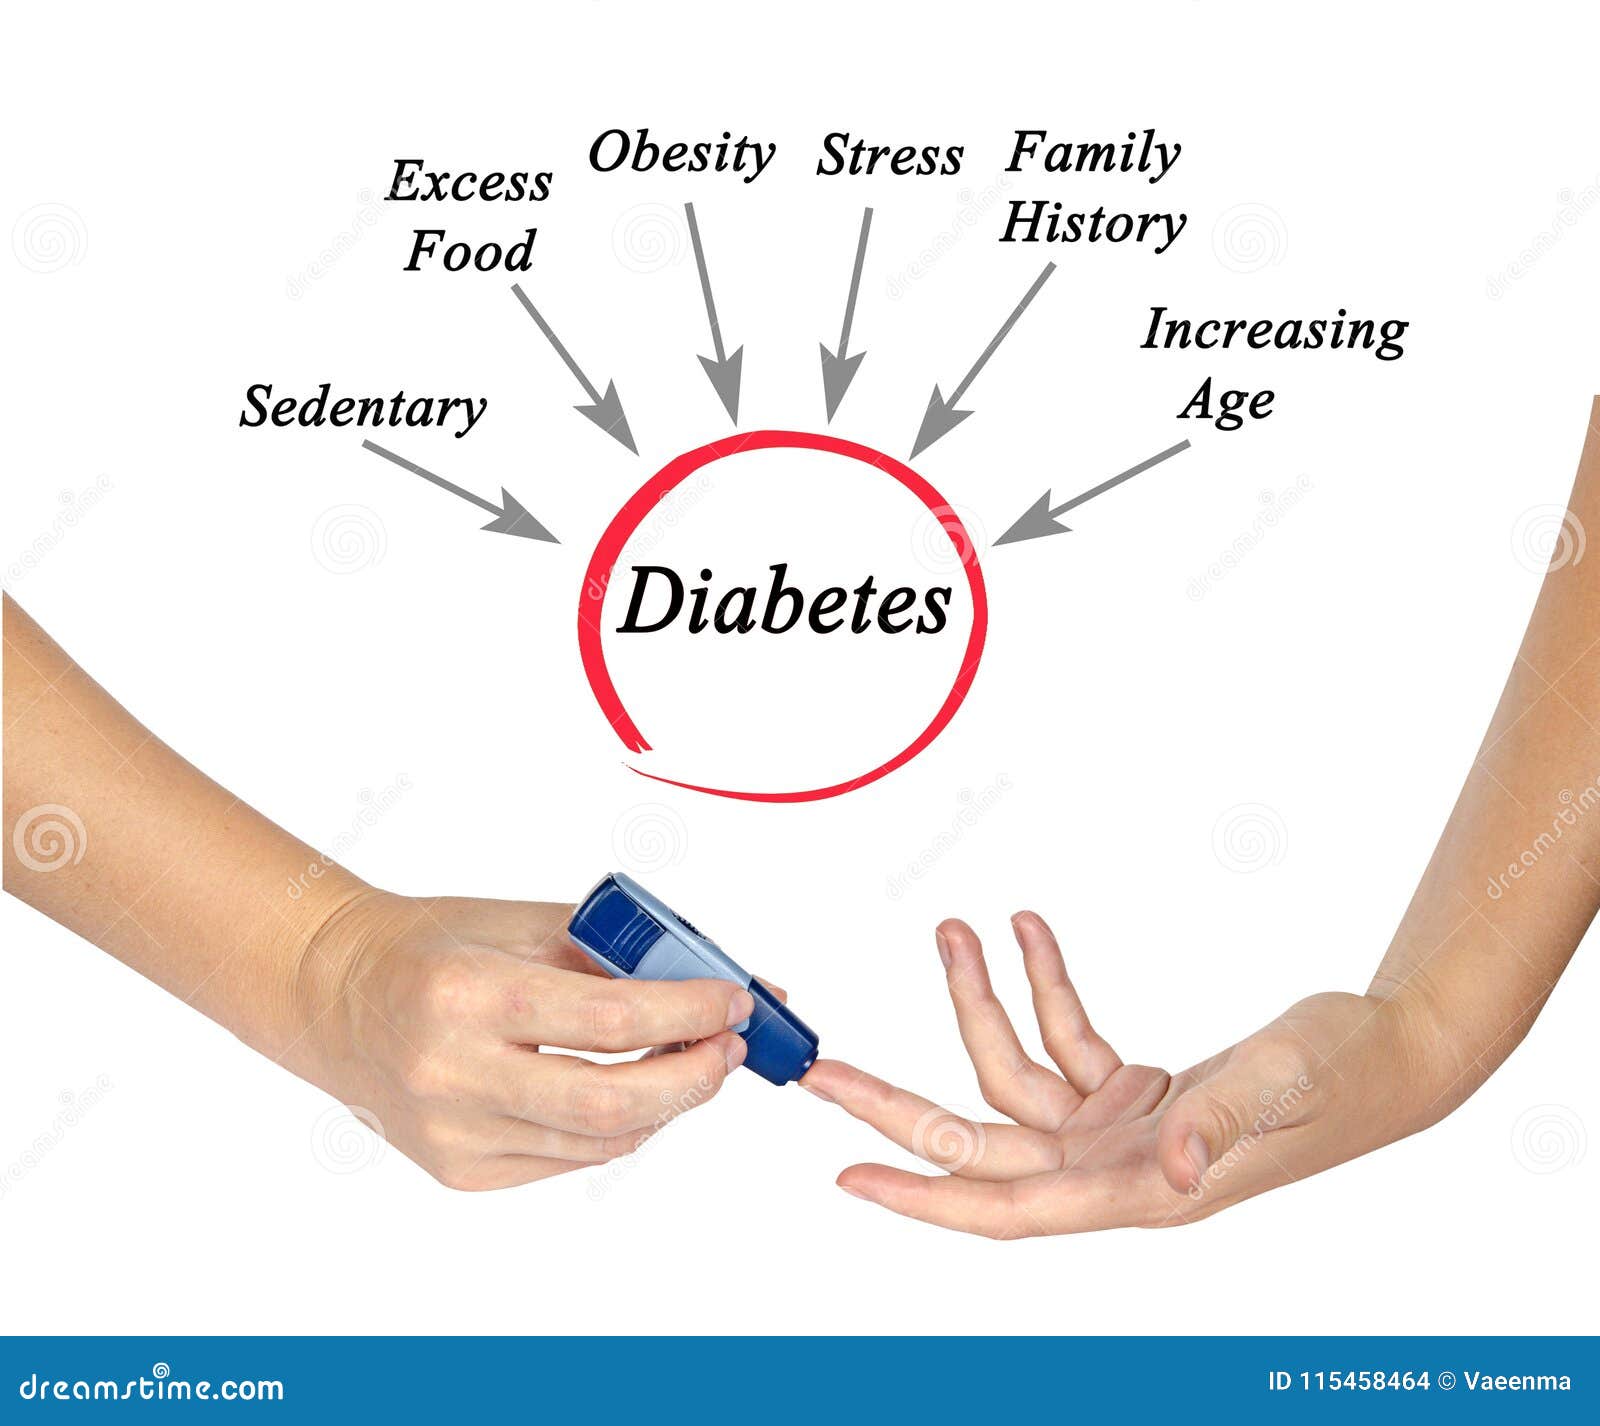 what causes diabetes